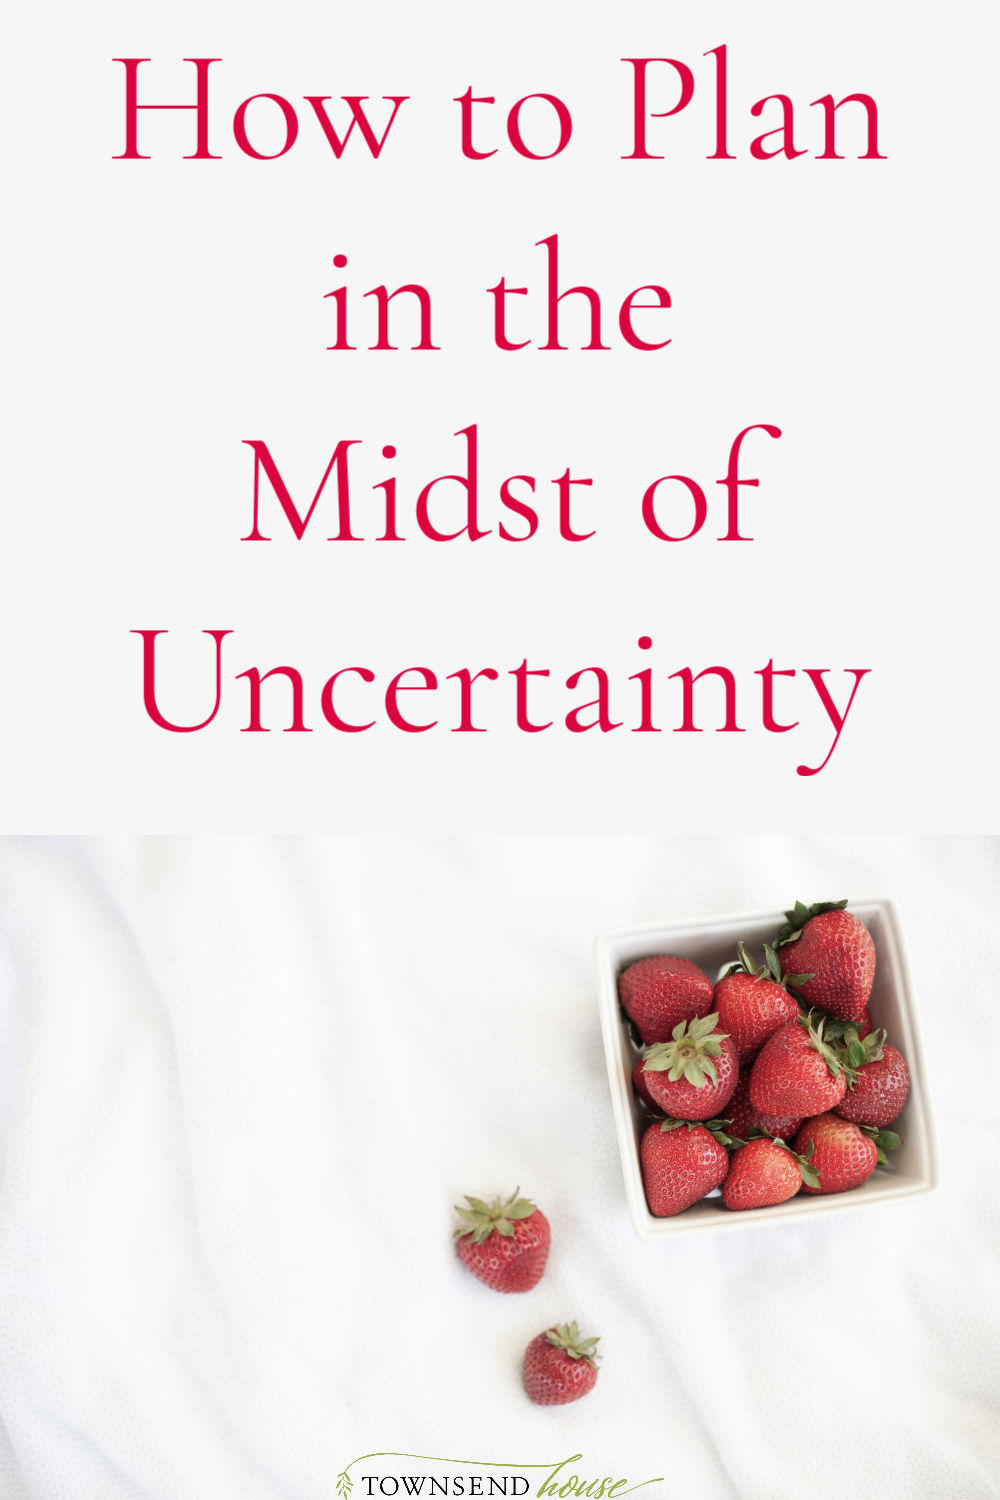 How to Plan in the Midst of Uncertainty